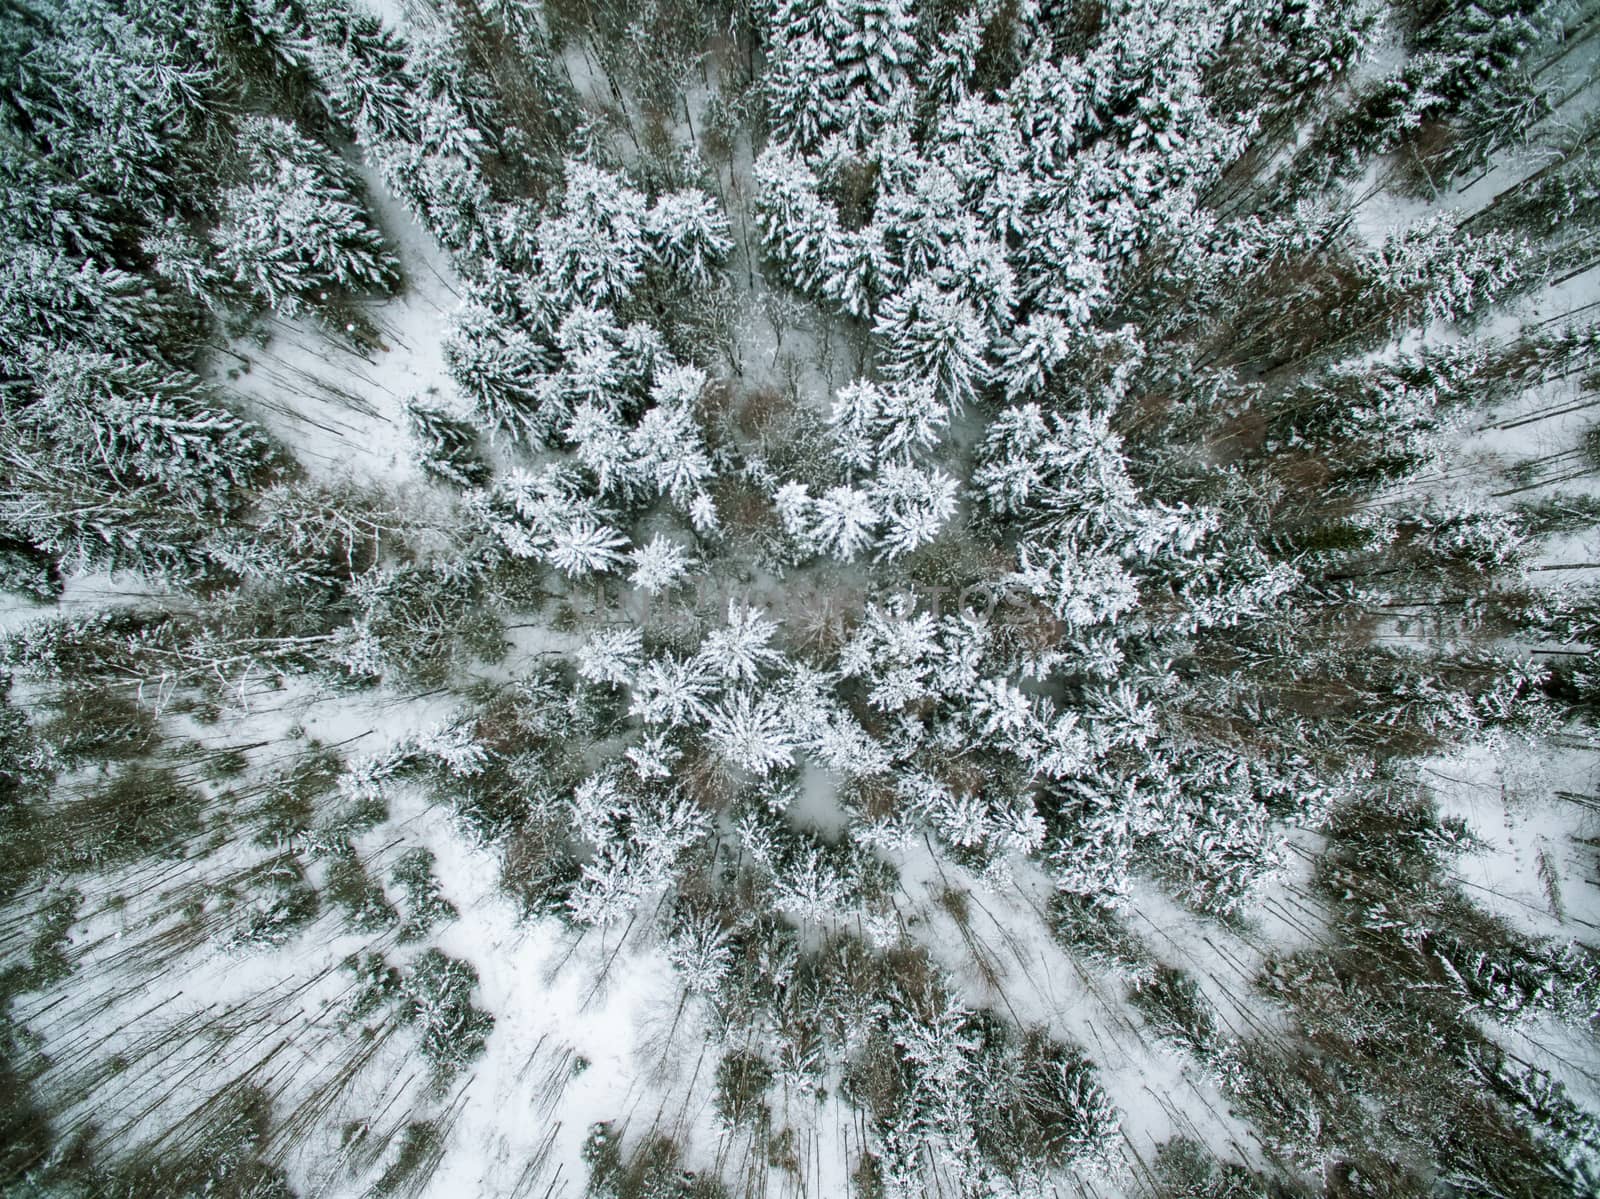 Winter in the forest from above looking down